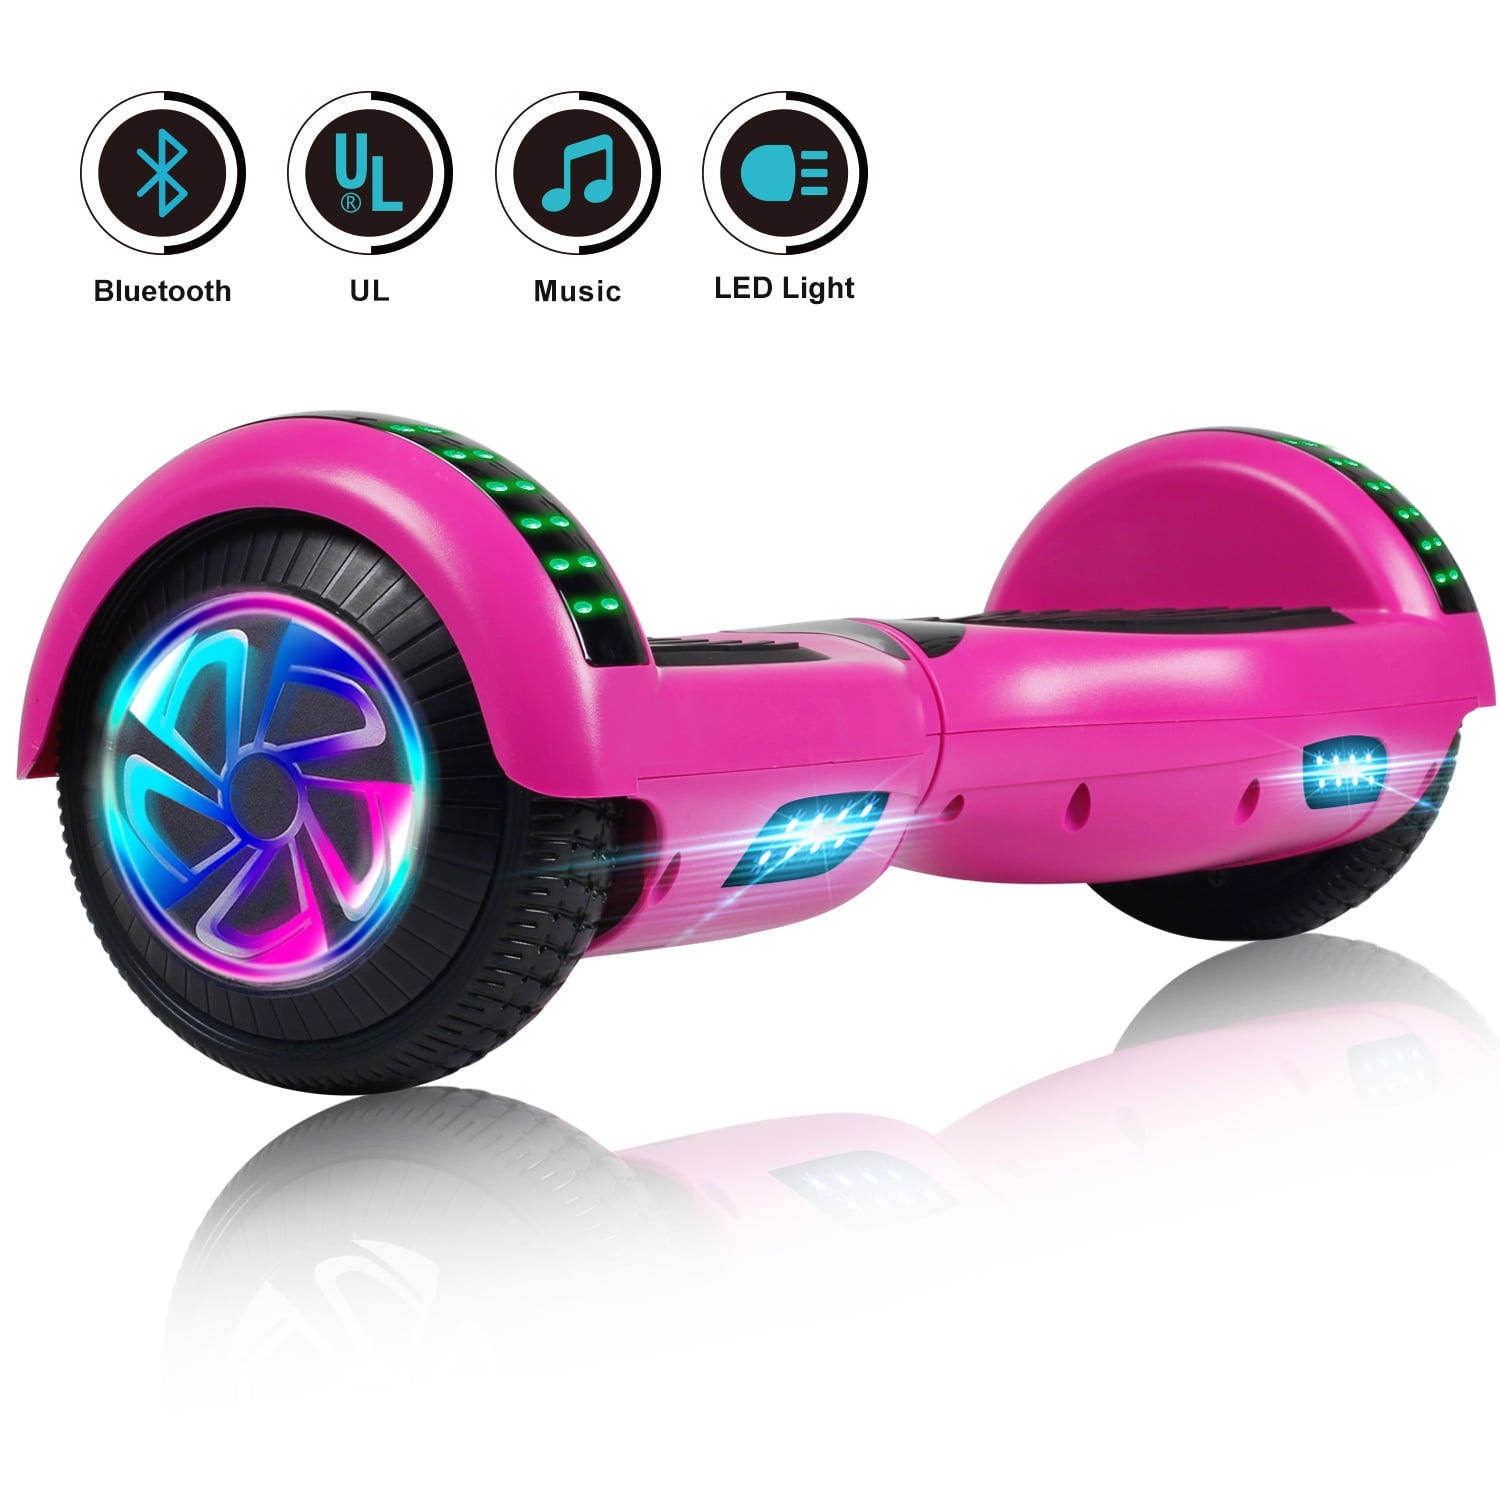 SISIGAD Hoverboard 6.5